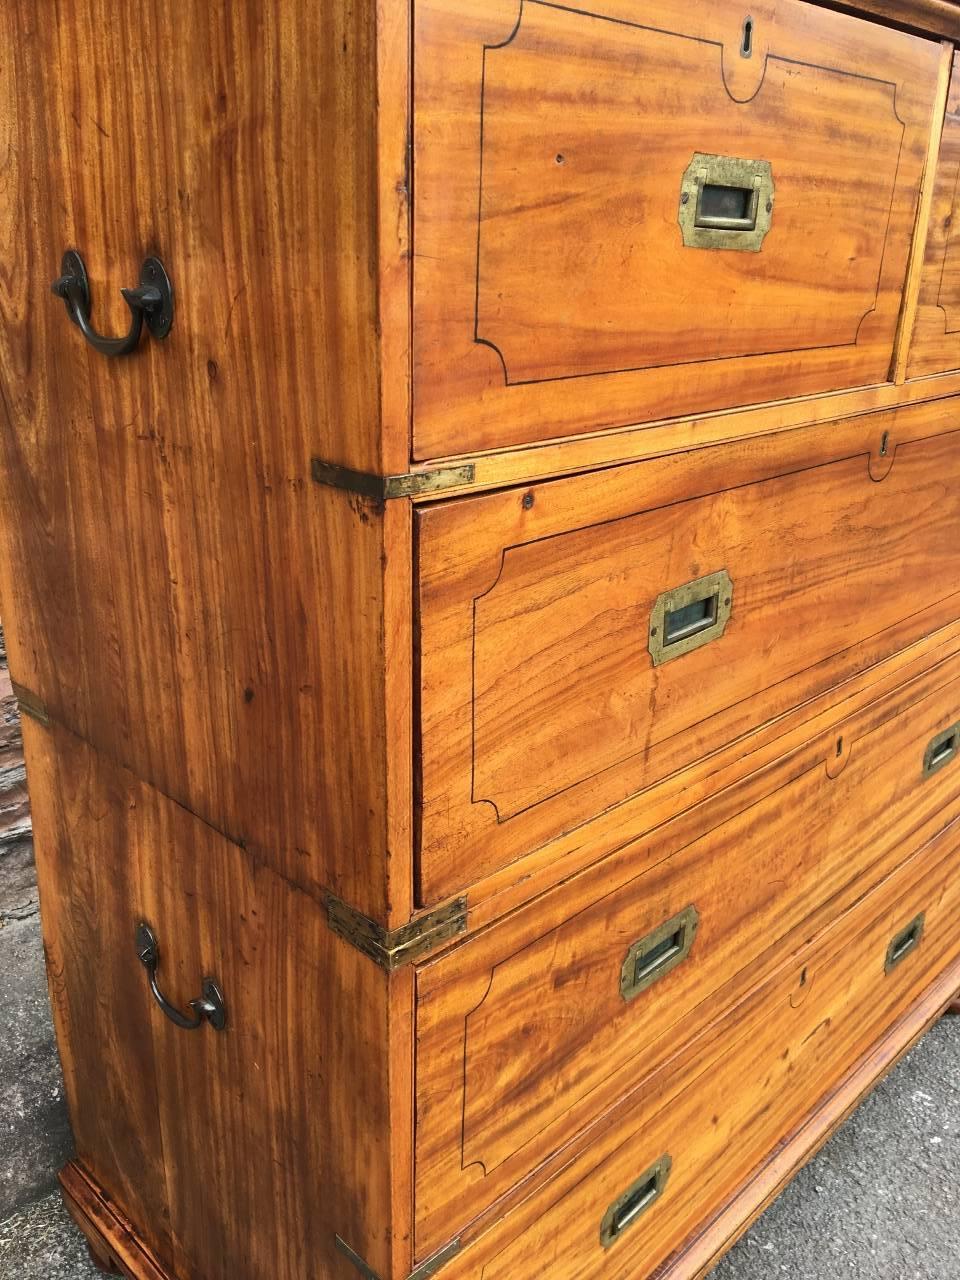 Superb mid-19th century camphor wood chest of five drawers in excellent condition. This delightful antique chest has brass carrying handles, original drawer handles and corner plates. All the drawers run smoothly and the drawer fronts are banded 